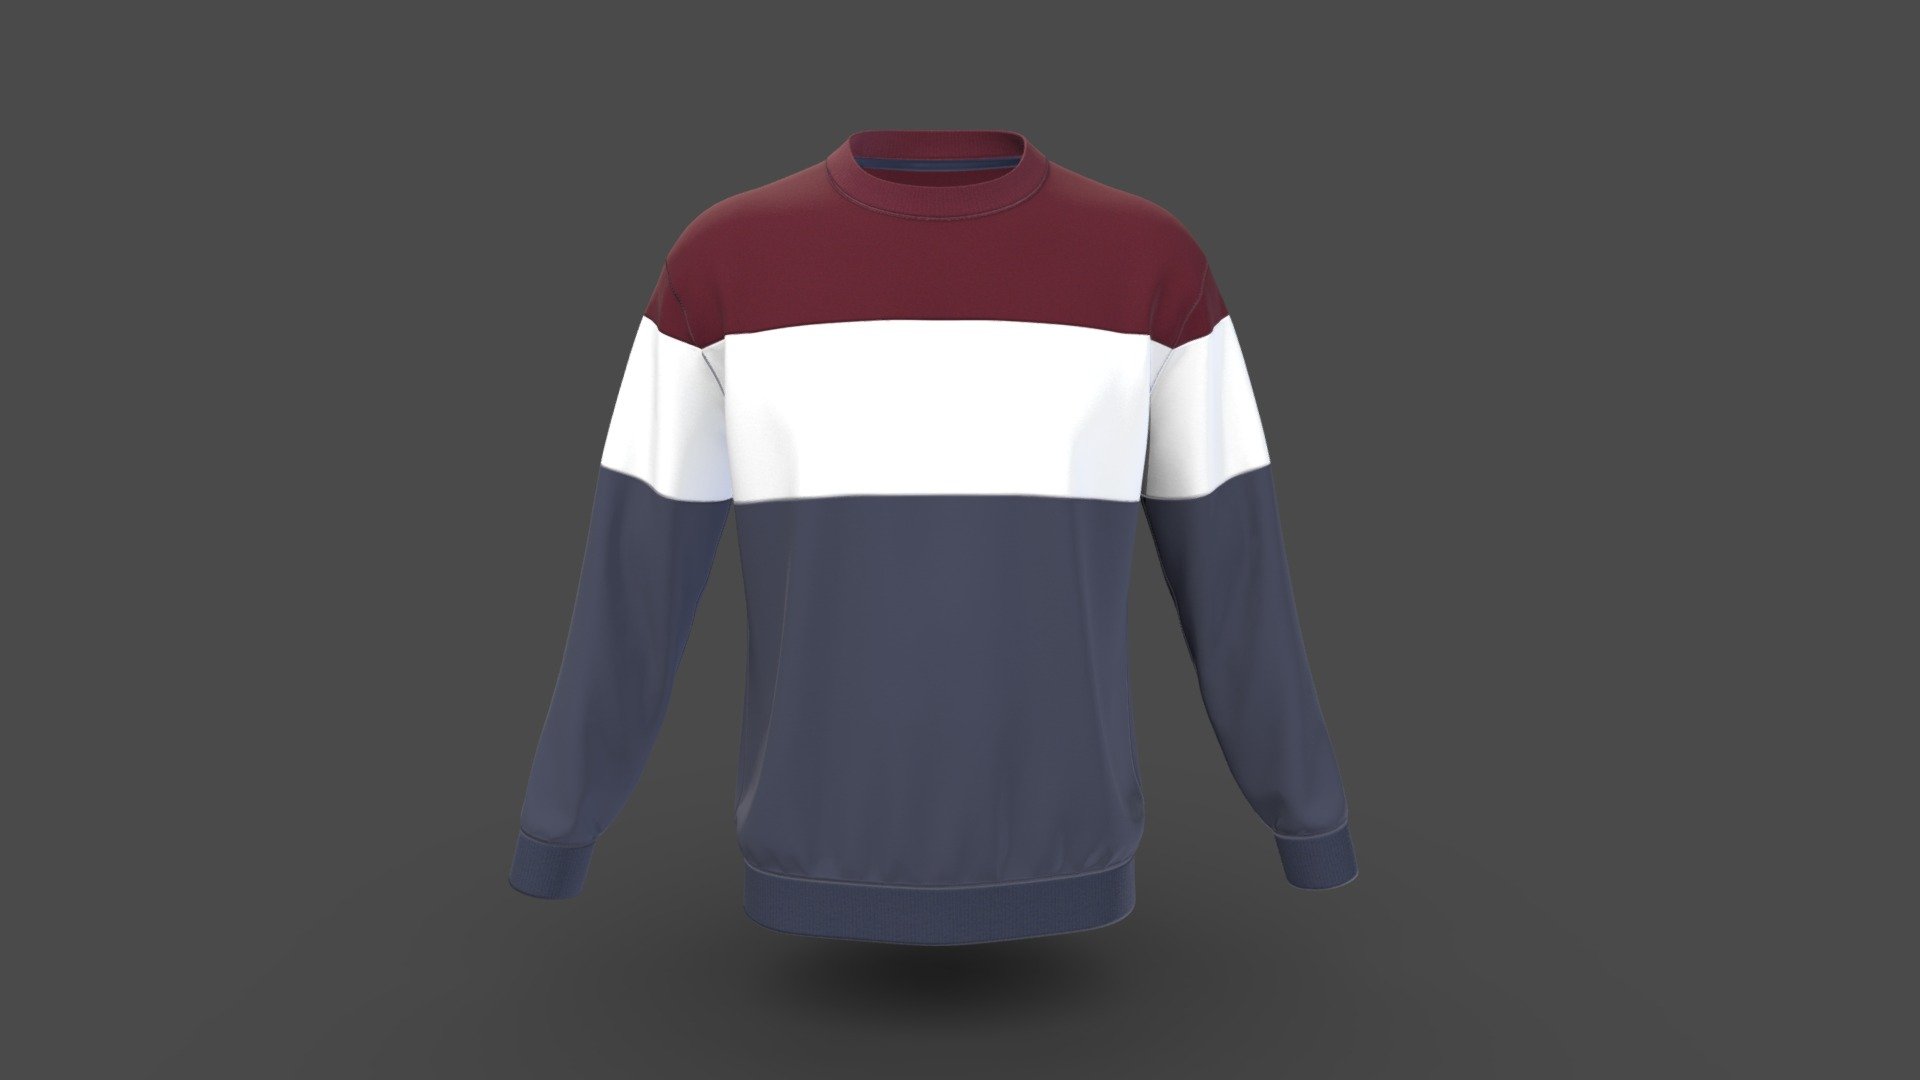 Men Classic Color Block Sweatshirt
Version V1.0

Realistic high detailed Mens Sweatshirt with high resolution textures. Model created by our unique processing &amp; Optimized for 3D web and AR / VR

Features

Optimized &amp; NON-Optimized obj model with 4K texture included


Optimized for AR/VR/MR
4K &amp; 2K fabric texture and details
Optimized model is 3.11MB
Unit measurement of obj is cm
Knit fabric texture and print details included
GLB file in 2k texture size is 1.92MB
GLB file in 4k texture size is 6.7MB (Game &amp; Animation Ready)
Unit measurement of glb is meter
Suitable for web application configurator development.
Fully unwrap UV
The model has 1 material
Includes high detailed normal map
Triangular Mesh with 16.5k Vertices
Texture map: Base color, OcclusionRoughnessMetallic(ORM), Normal

Tpose  available on request

For more details or custom order send email: hello@binarycloth.com

Website:binarycloth.com - Men Classic Color Block Sweatshirt - Buy Royalty Free 3D model by BINARYCLOTH (@binaryclothofficial) 3d model